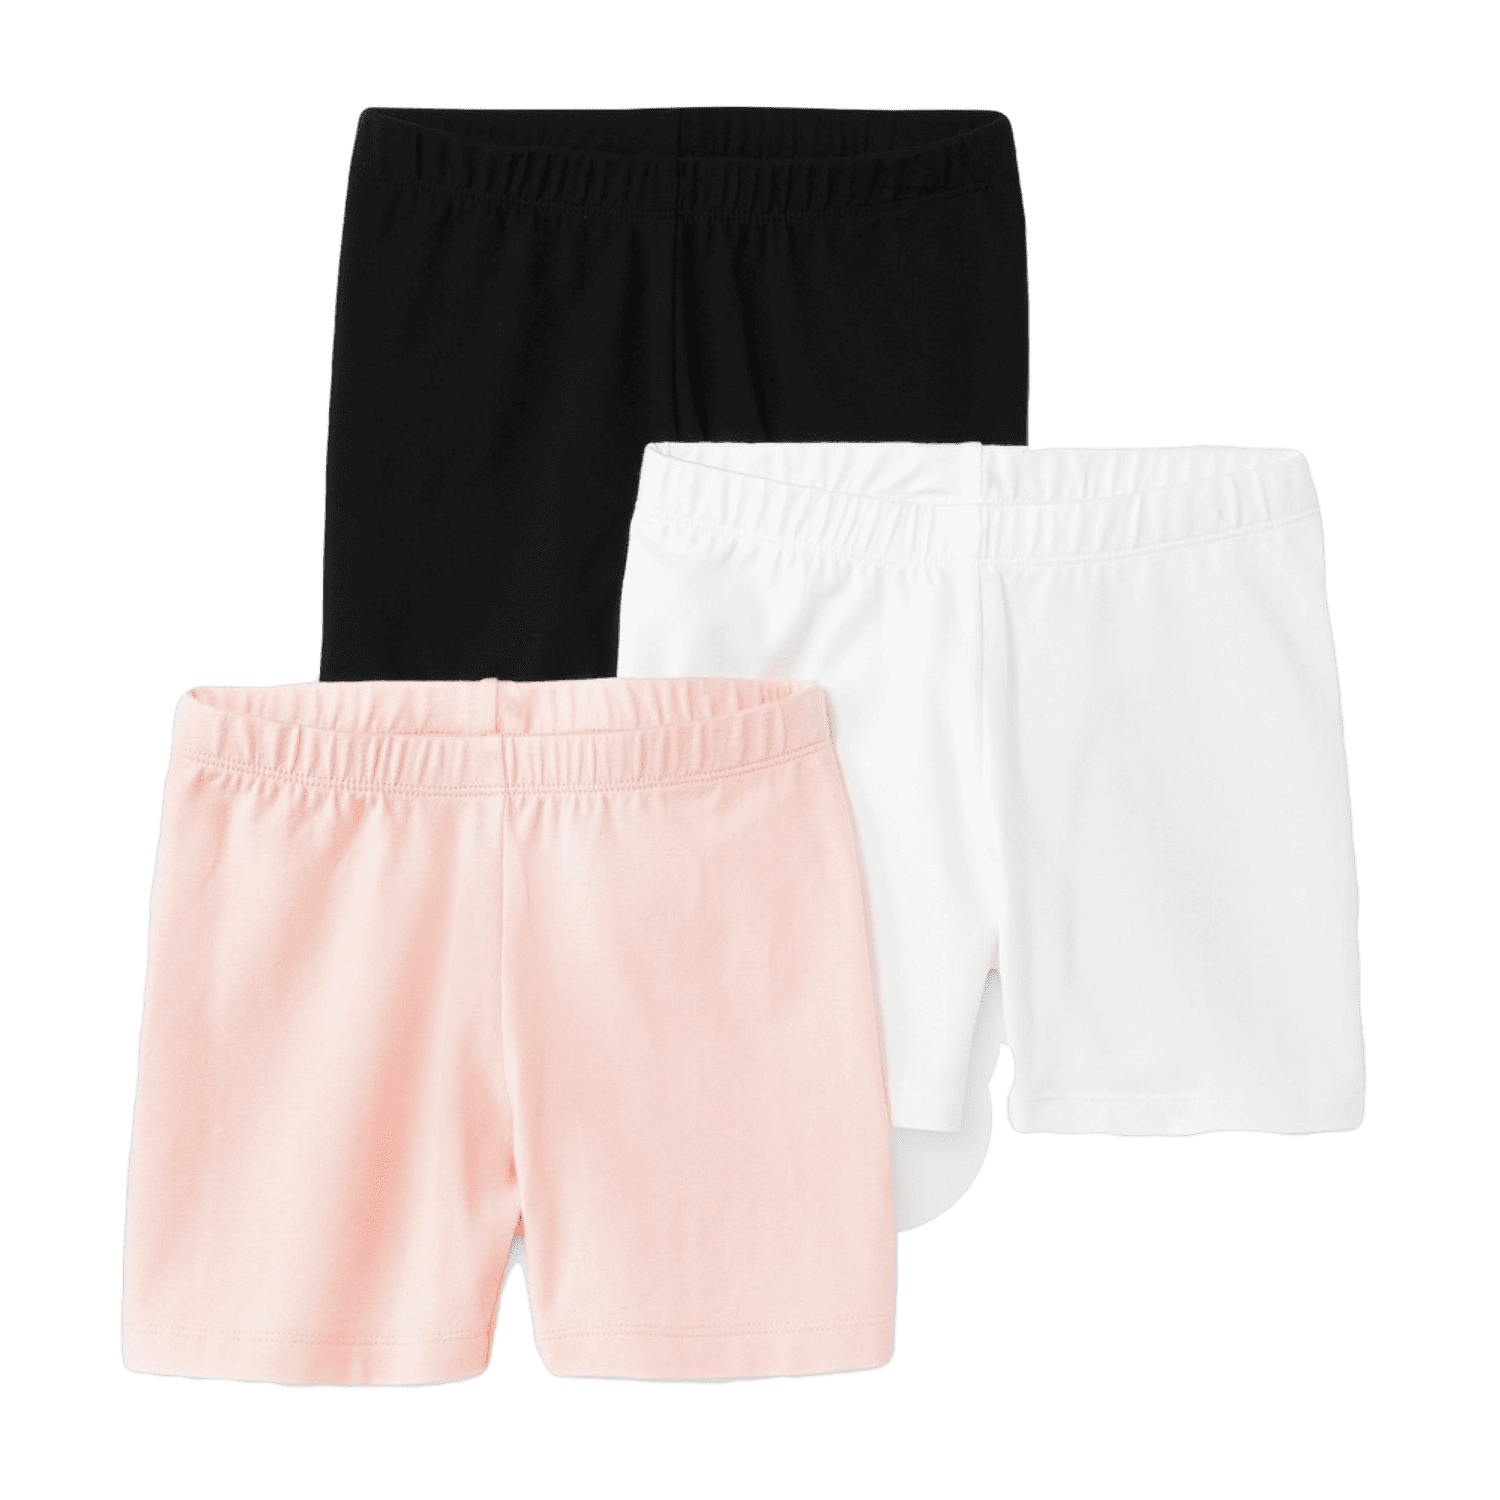 Flight approach voice Cat & Jack Girls' 3-Pack Tumble Shorts in Black/White/Pink, S - Walmart.com